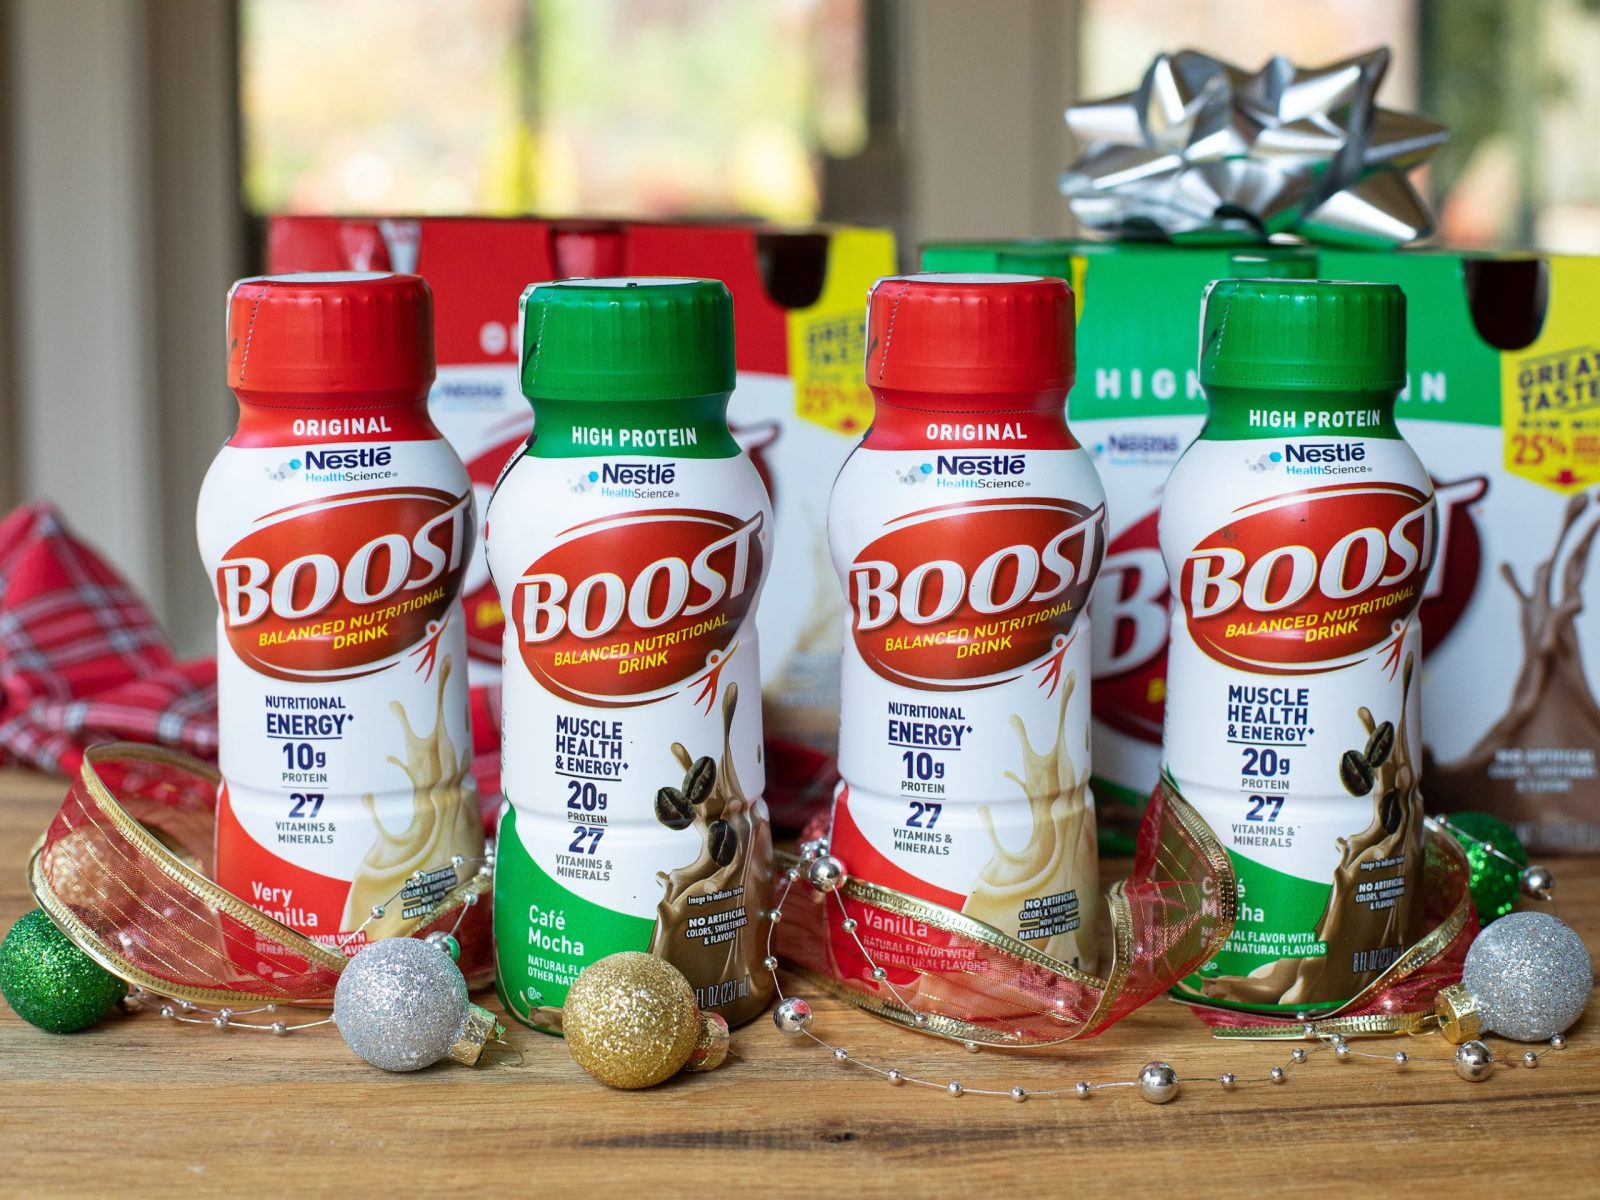 Save $4 On BOOST® Nutritional Drinks At Publix – Stock Up For The Busy Holiday Season!